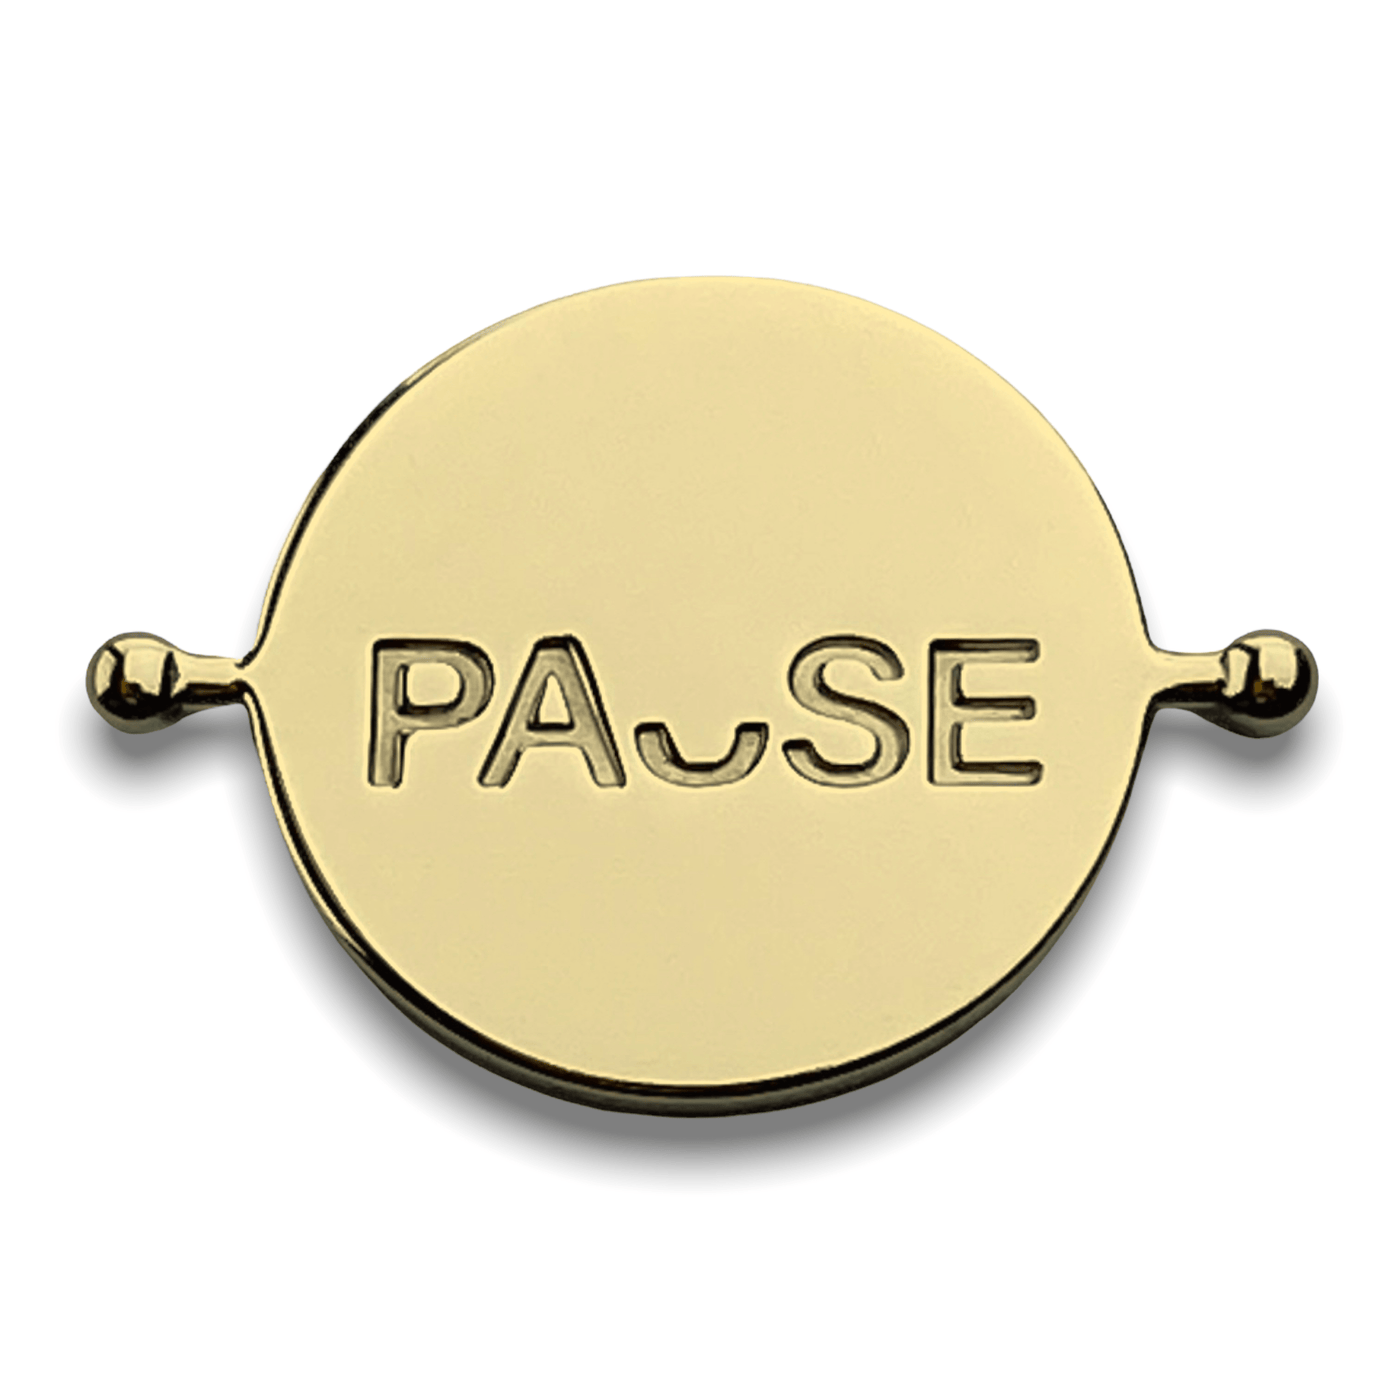 PAUSE Element (spin to reveal)